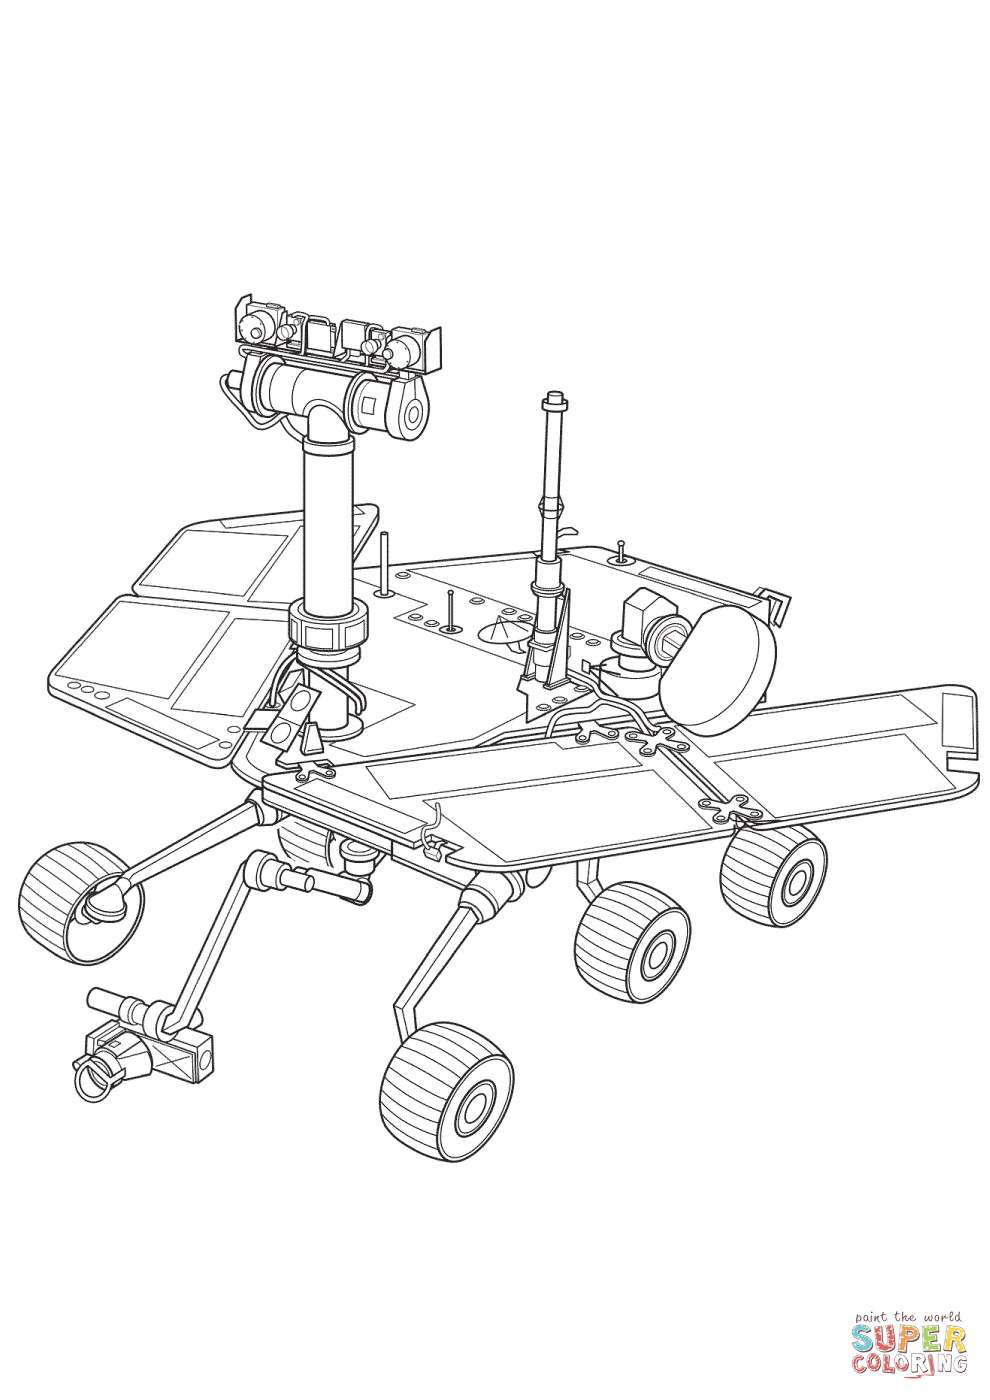 Rover coloring #8, Download drawings